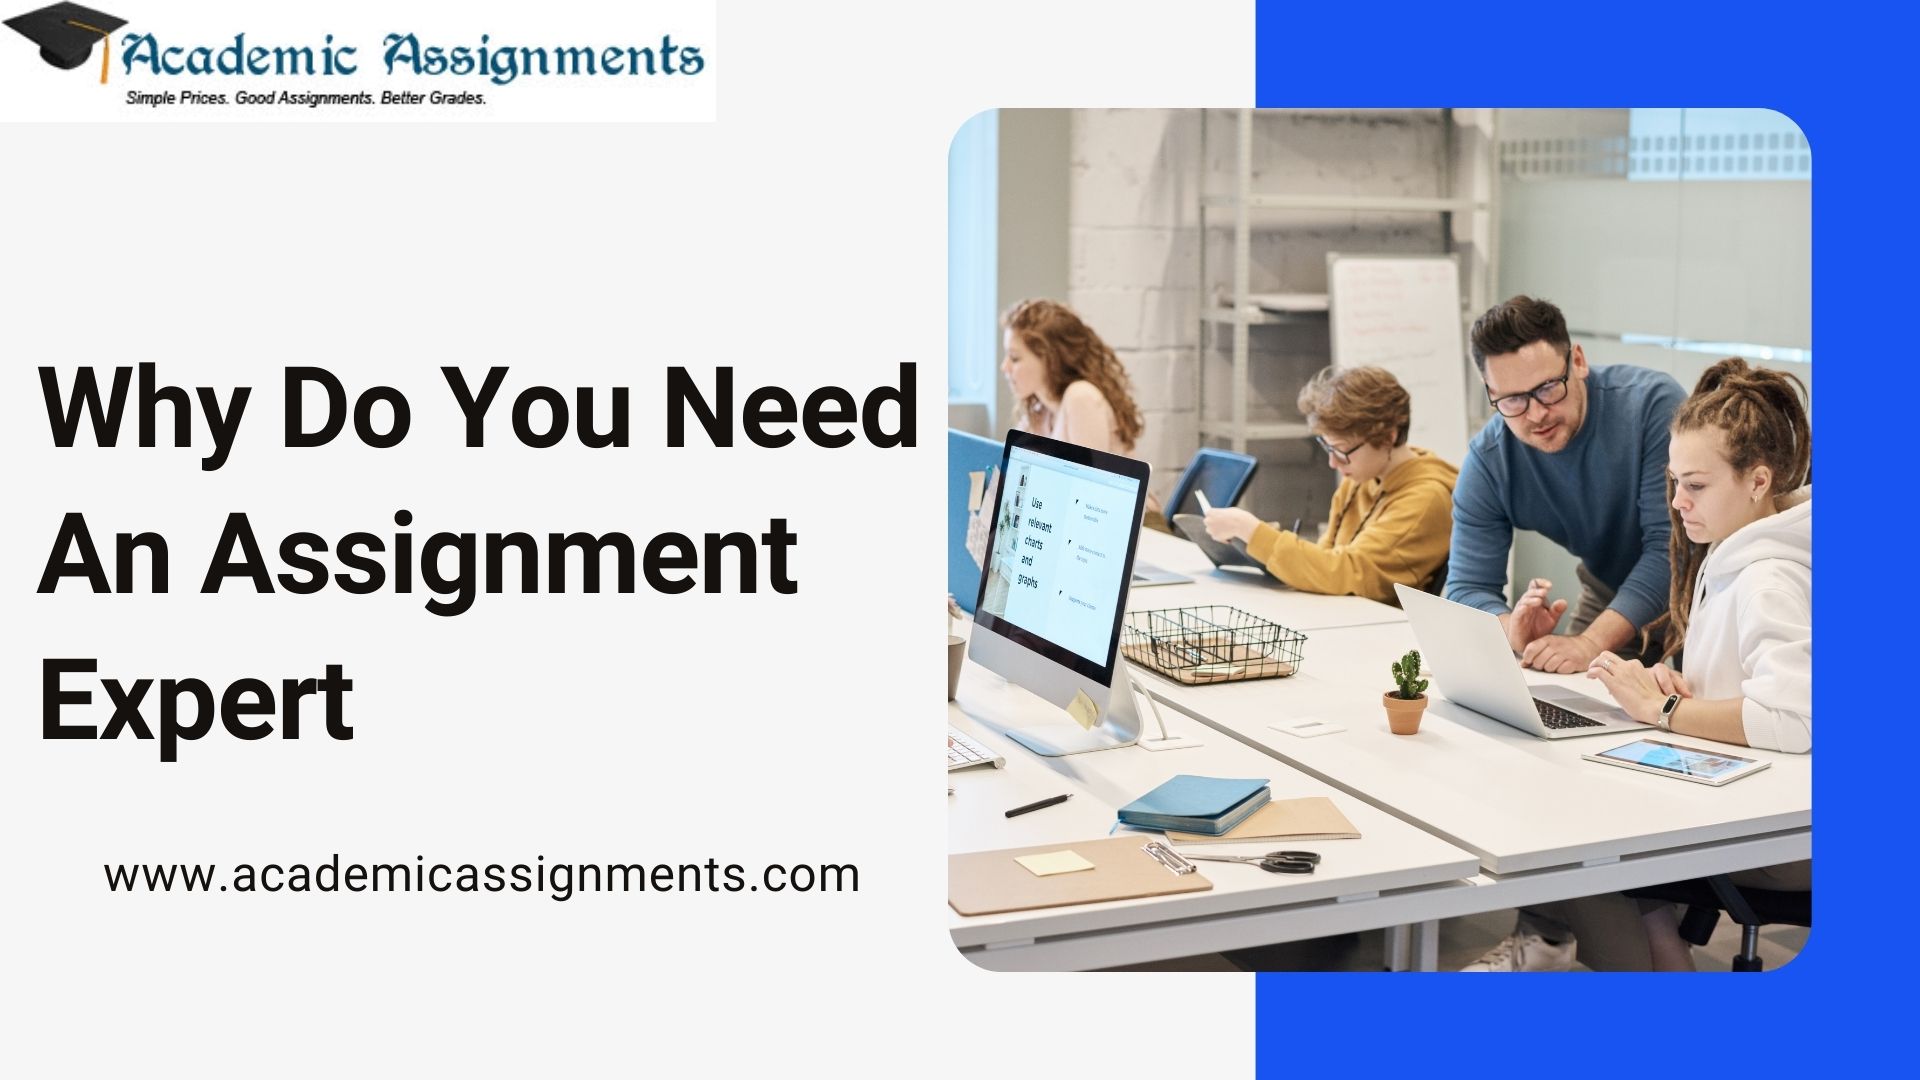 Why Do You Need An Assignment Expert